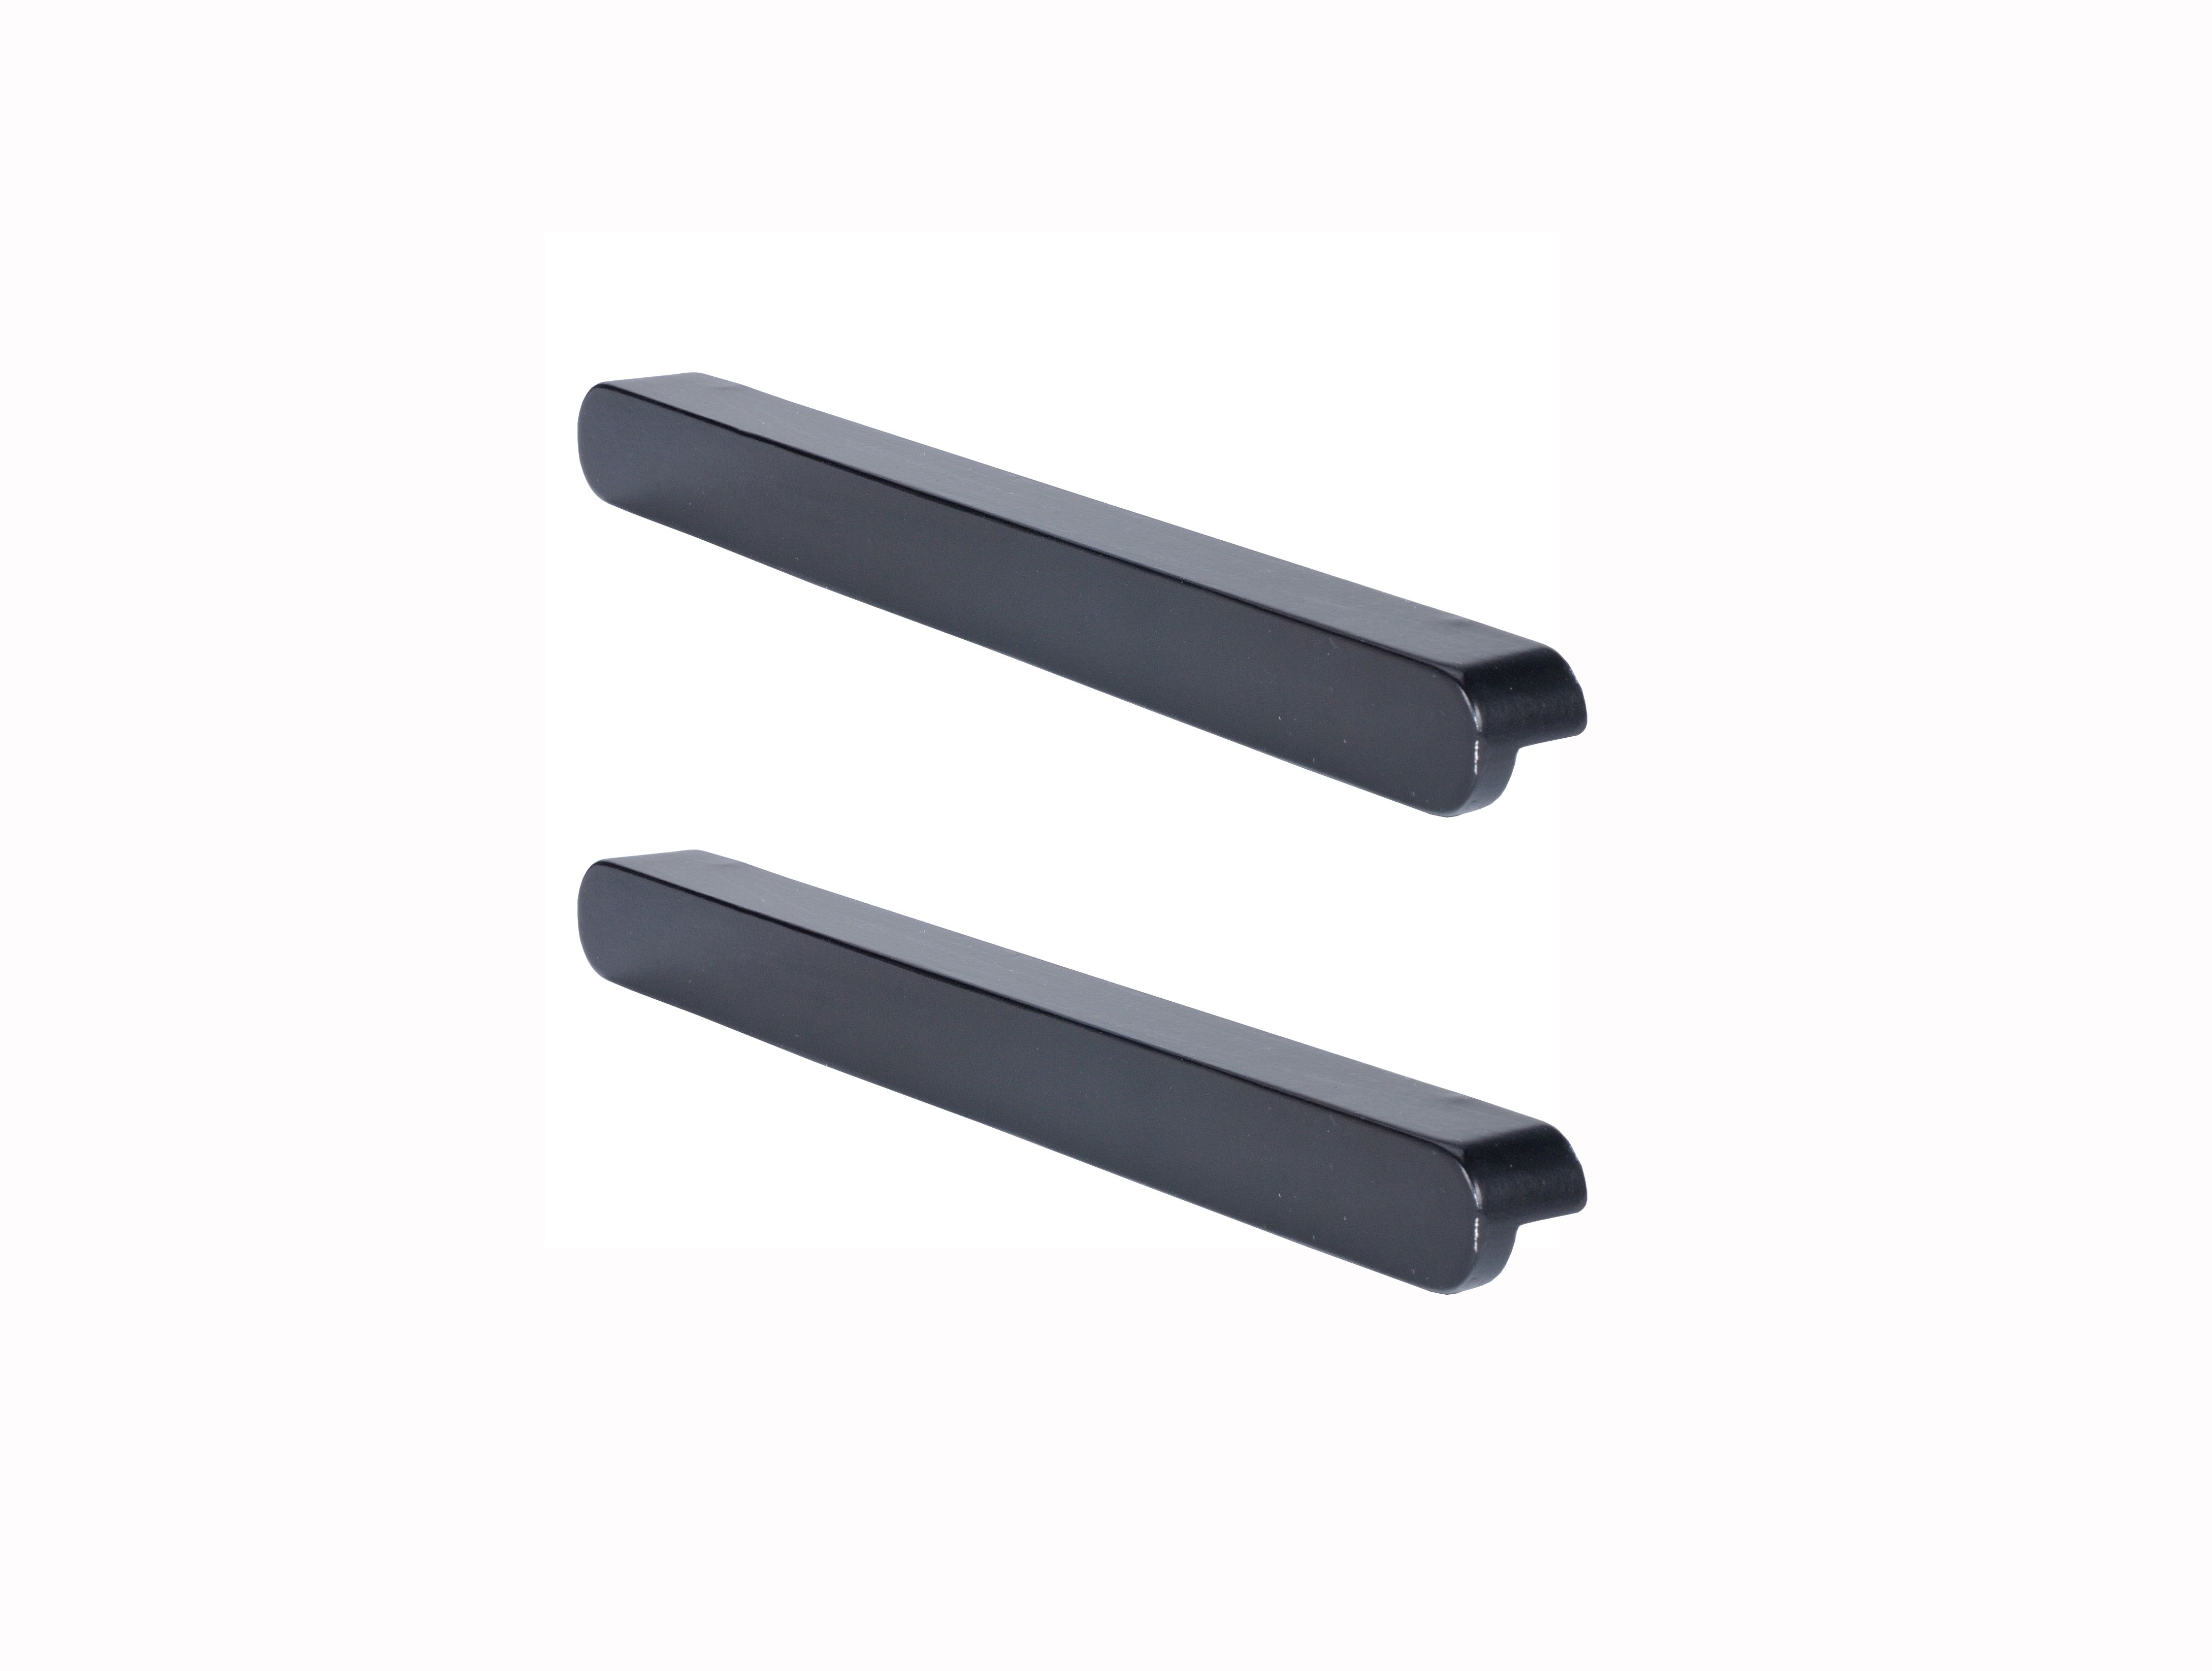 GoodHome Serrano Black Kitchen cabinets Handle (L)22cm, Pack of 2